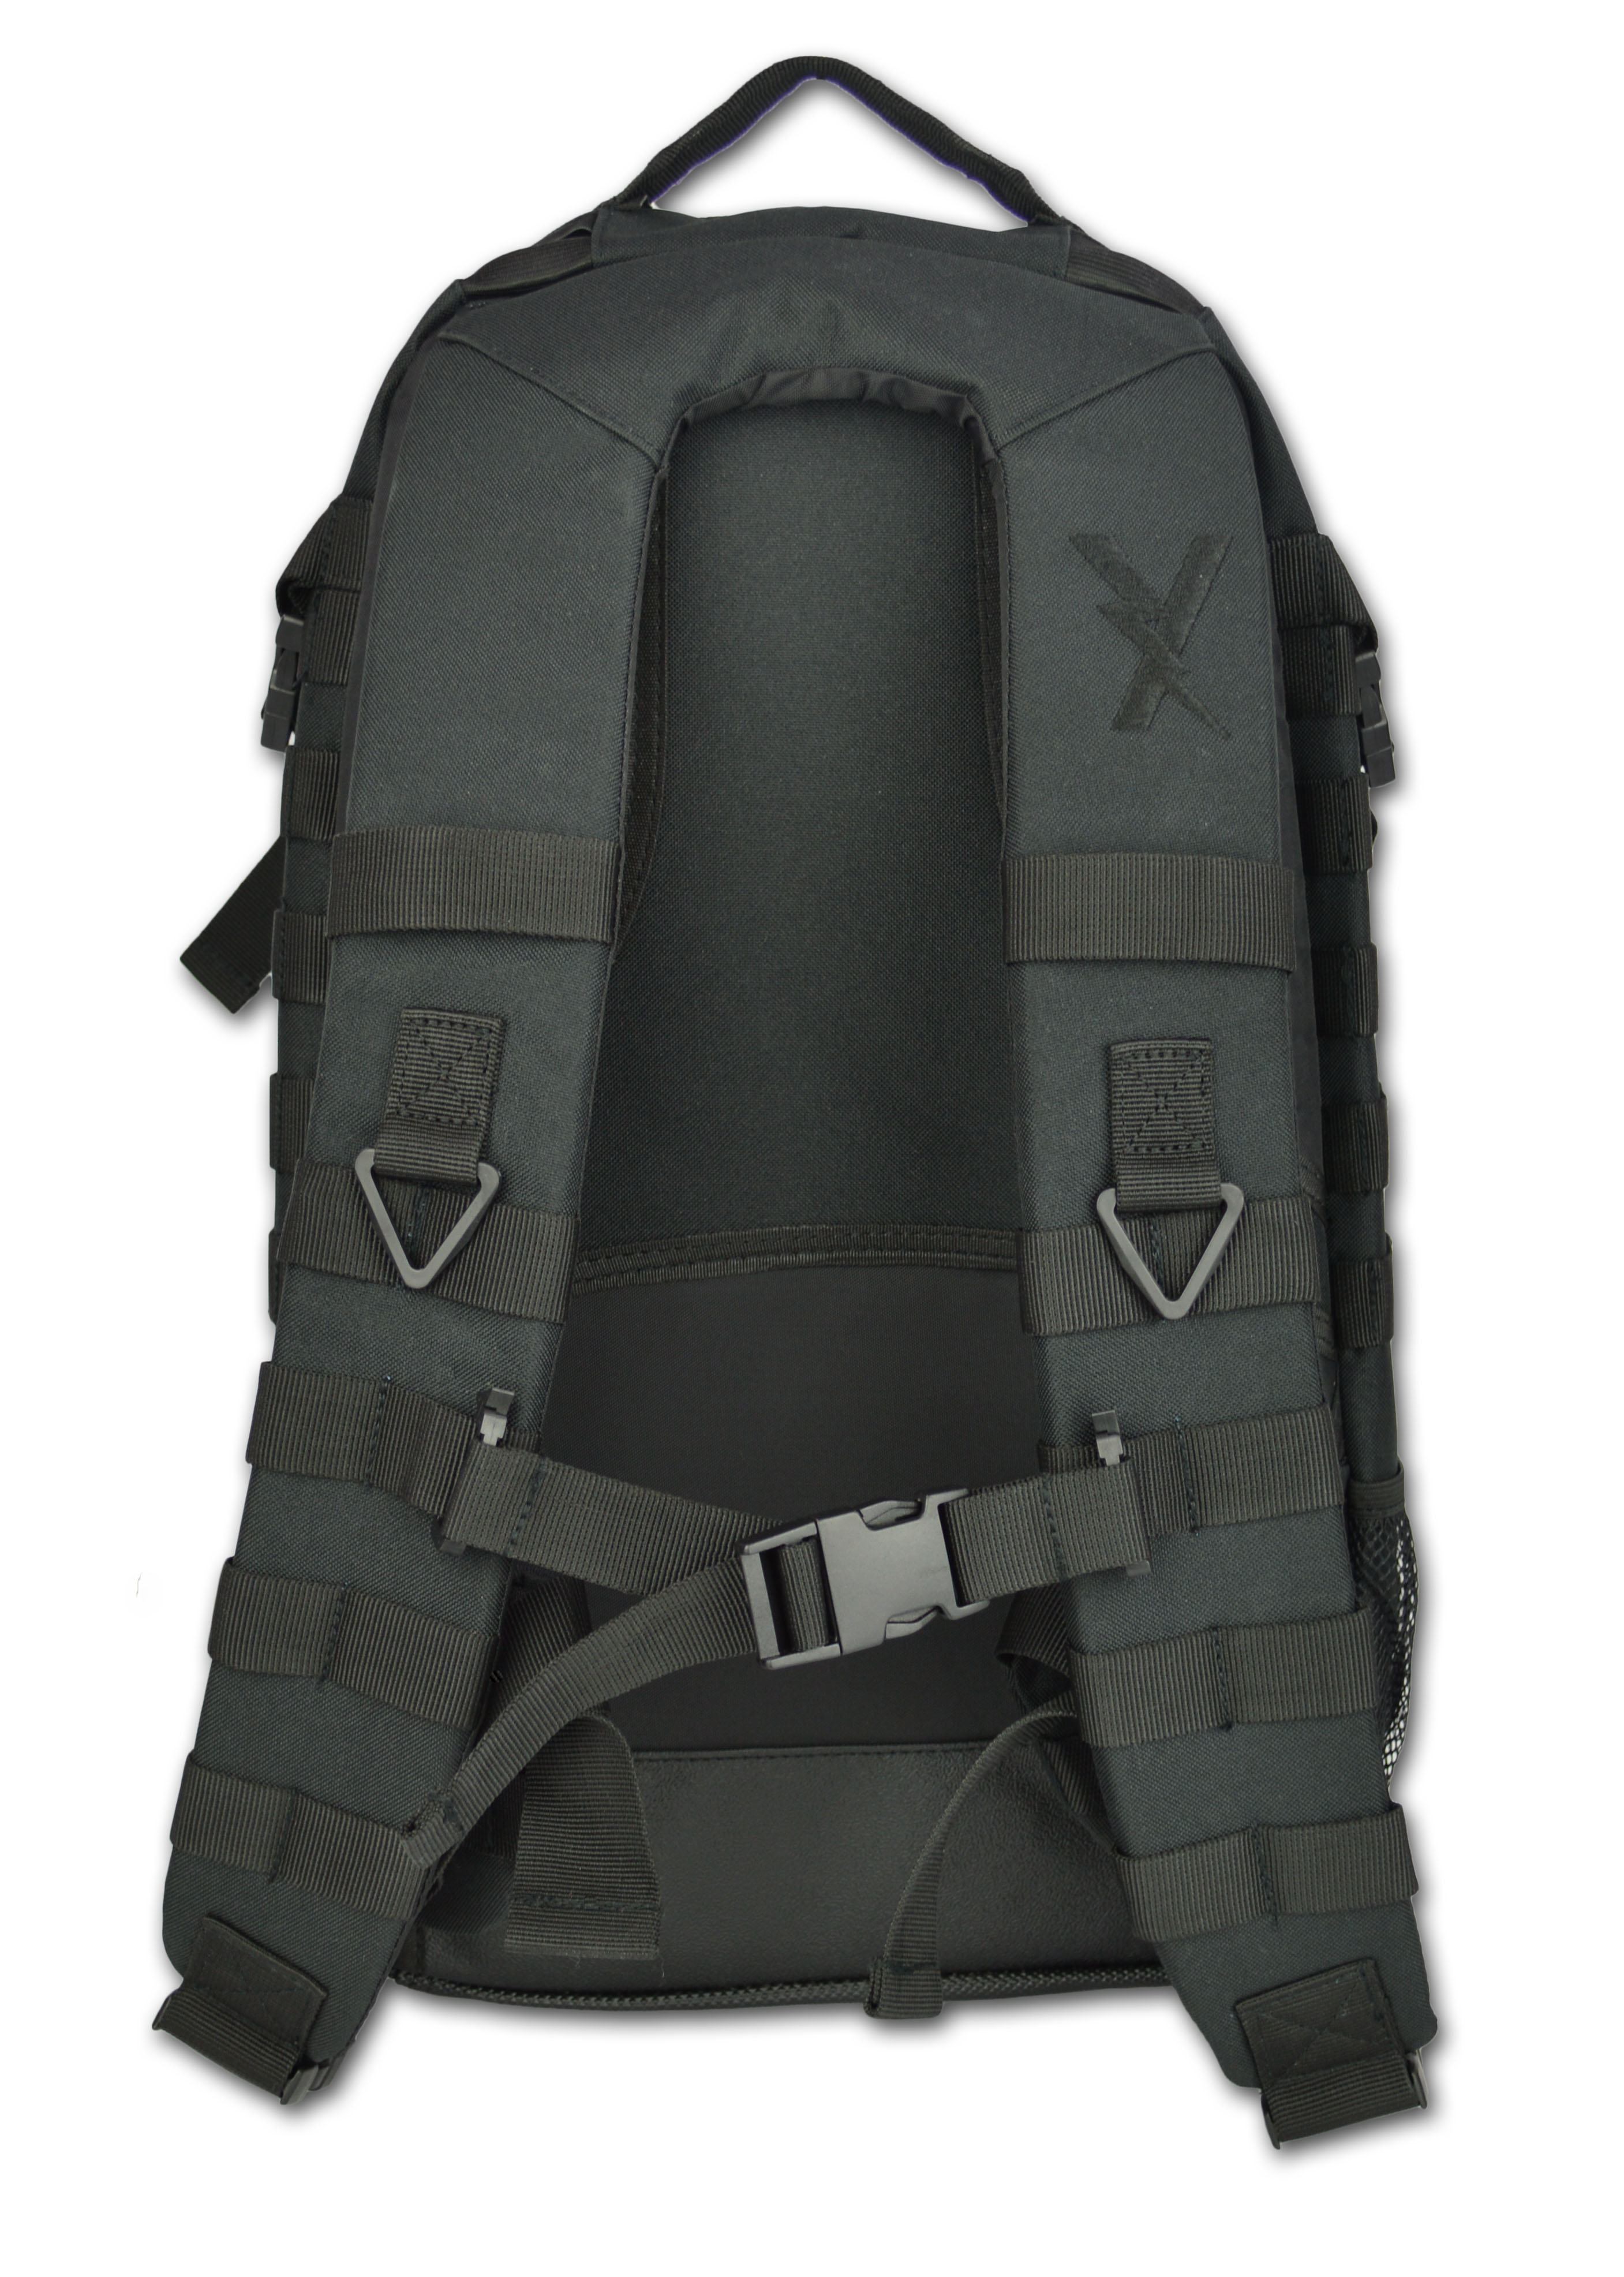 Lightning X Premium Tactical Medic Backpack w/ Modular Pouches & Hydration Port - image 2 of 3